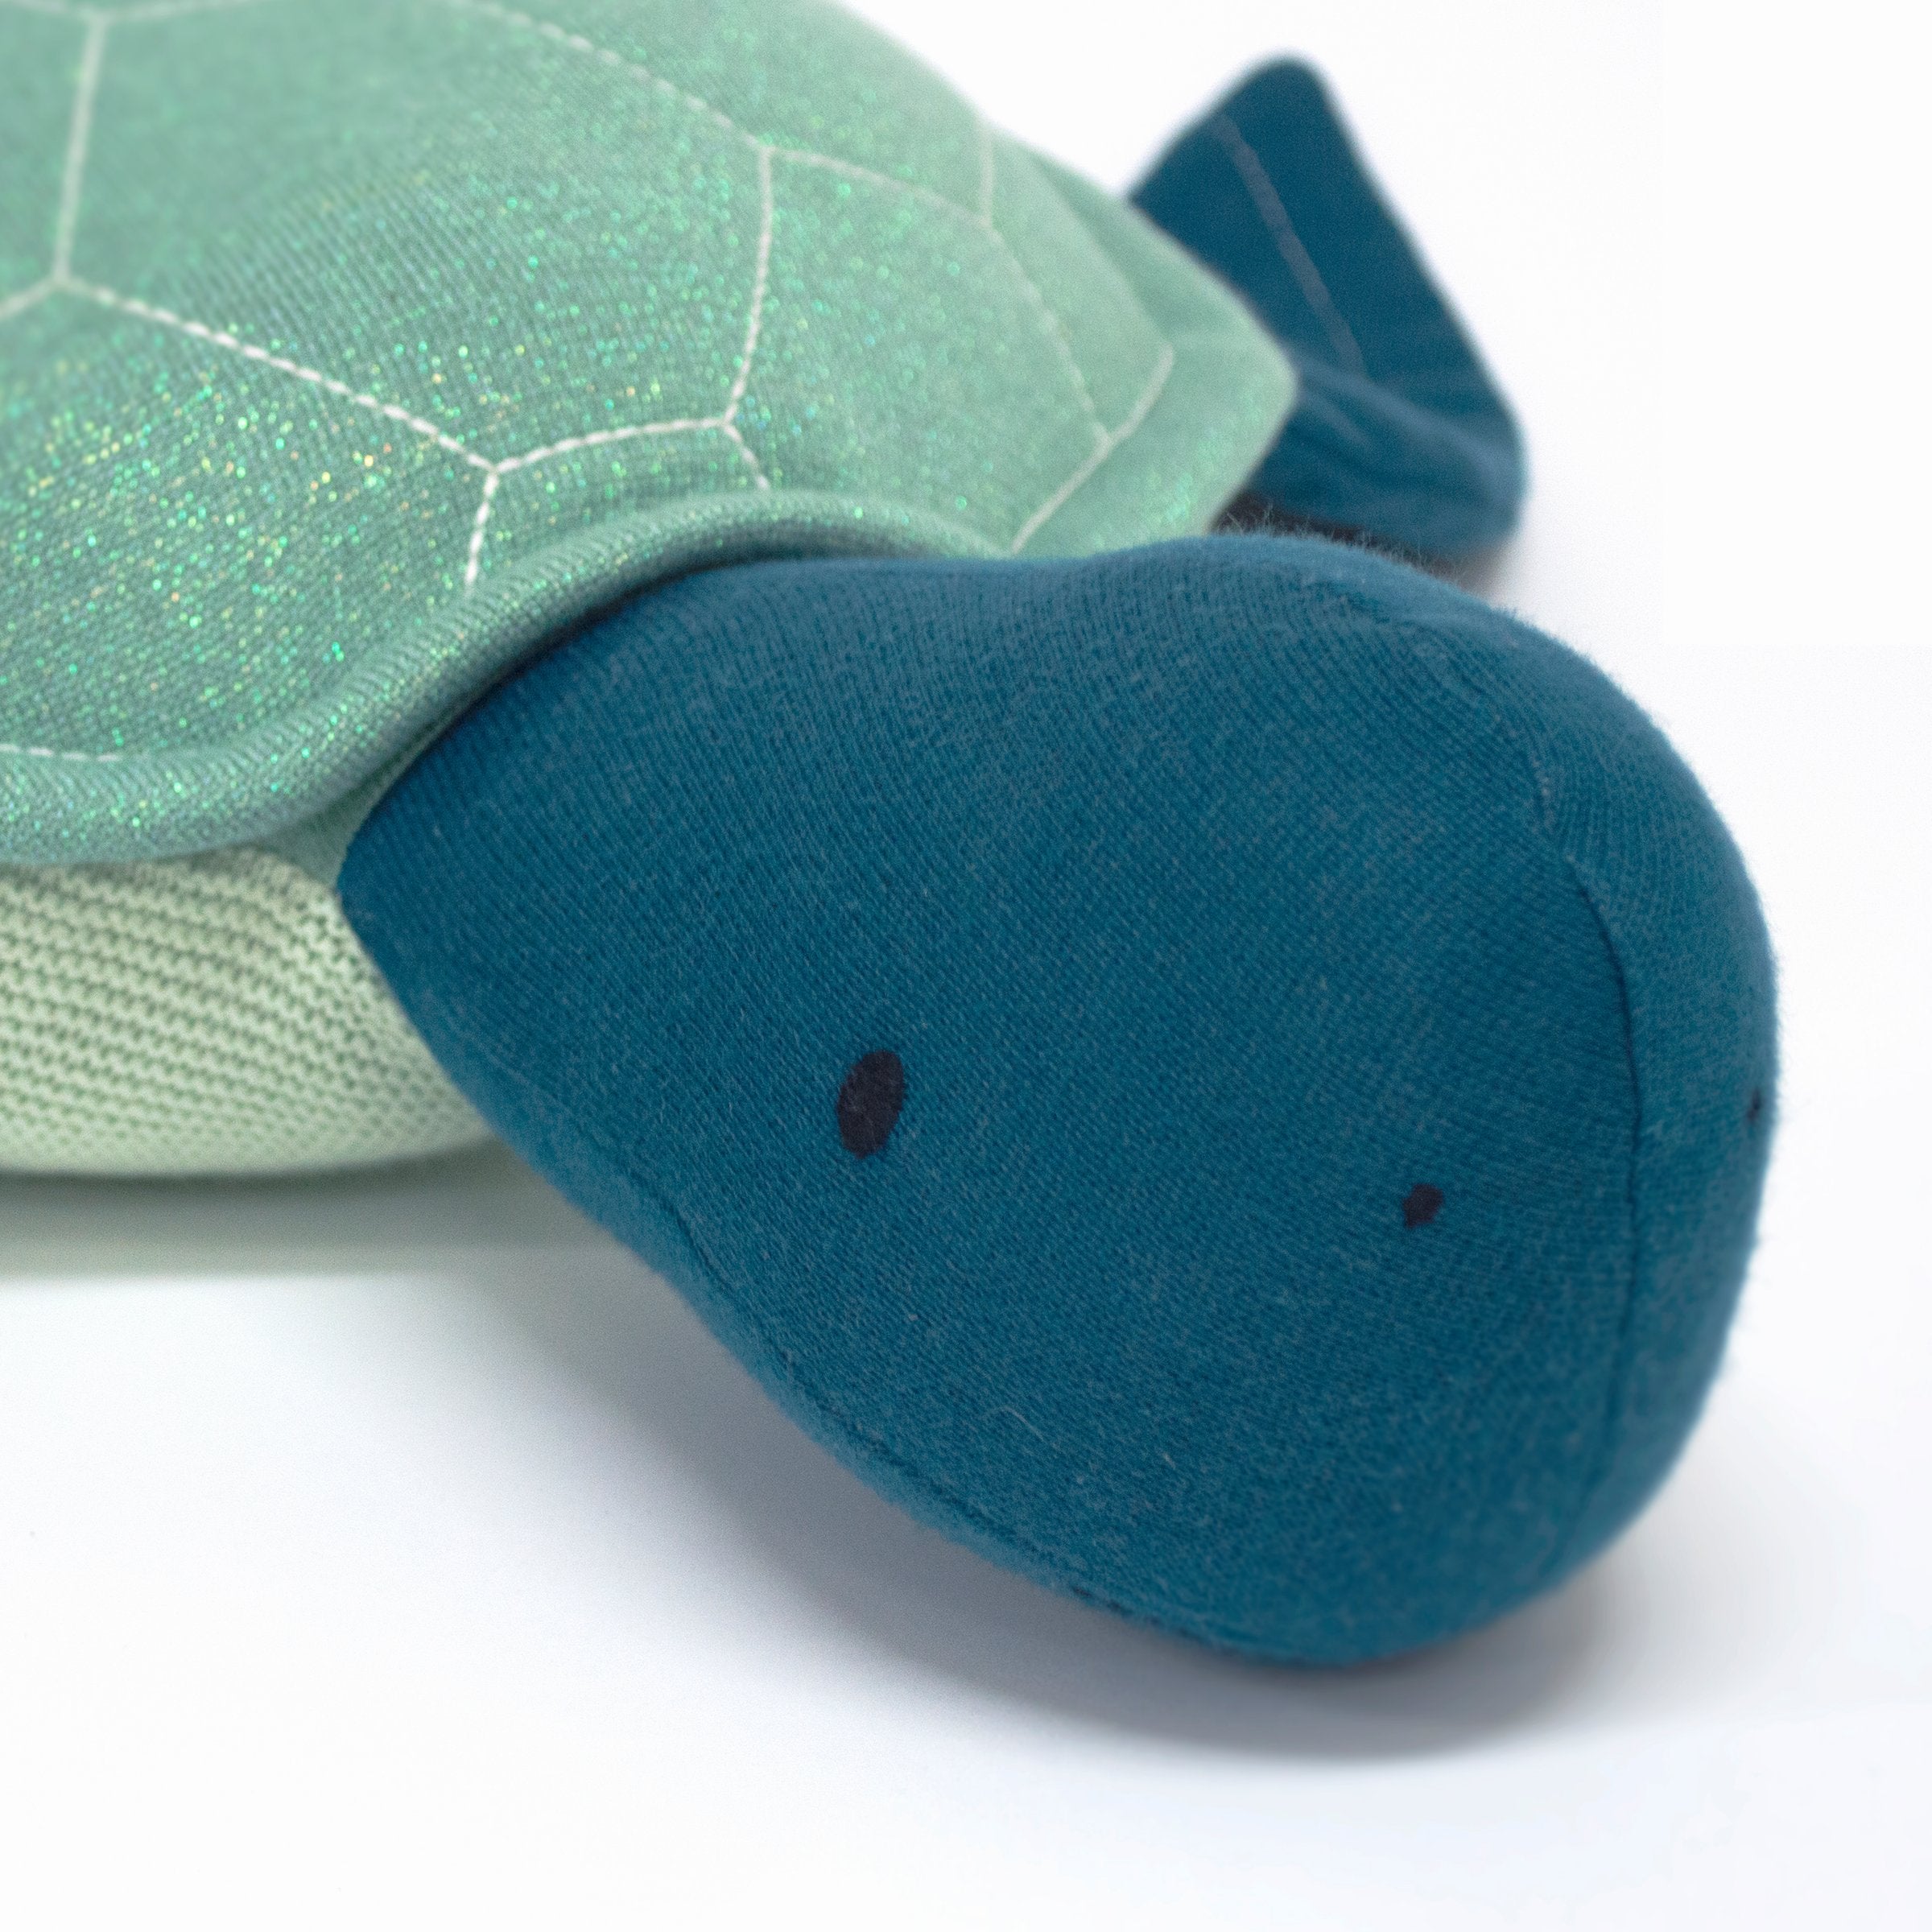 Our turtle toy is crafted from organic cotton. perfect as a baby shower gift idea.